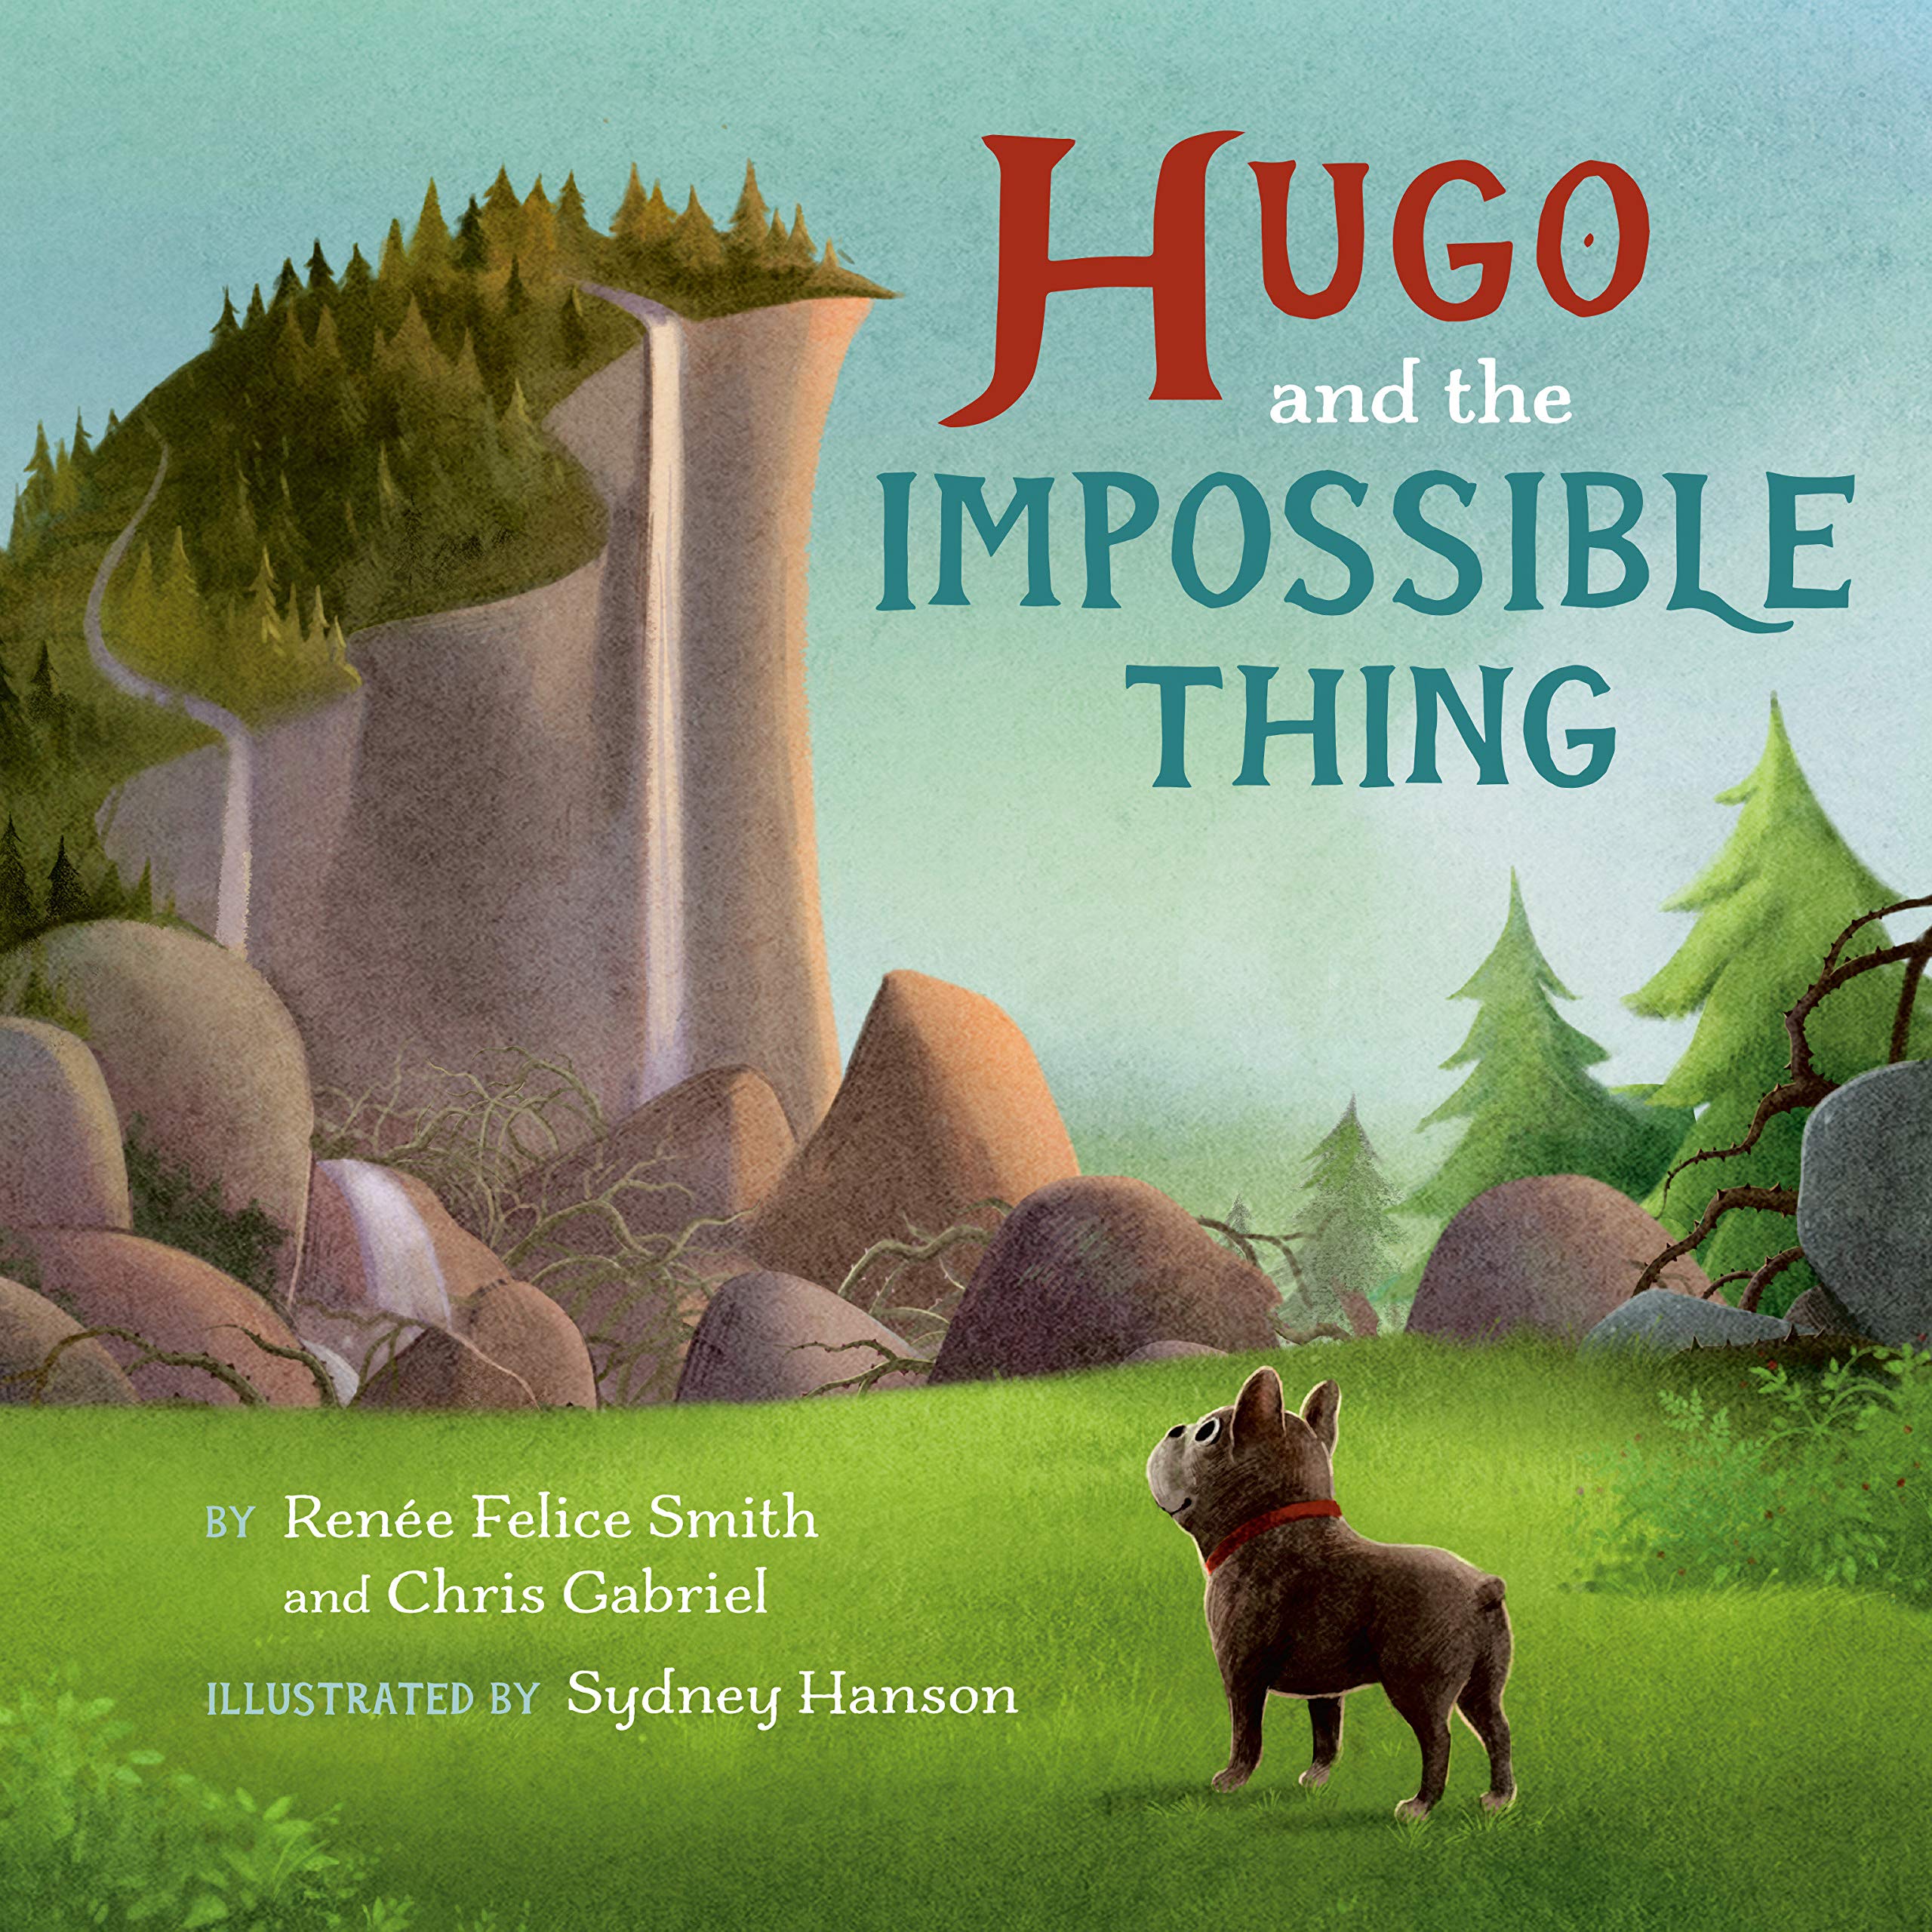 Hugo and the Impossible Thing by Renée Felice Smith and Chris Gabriel